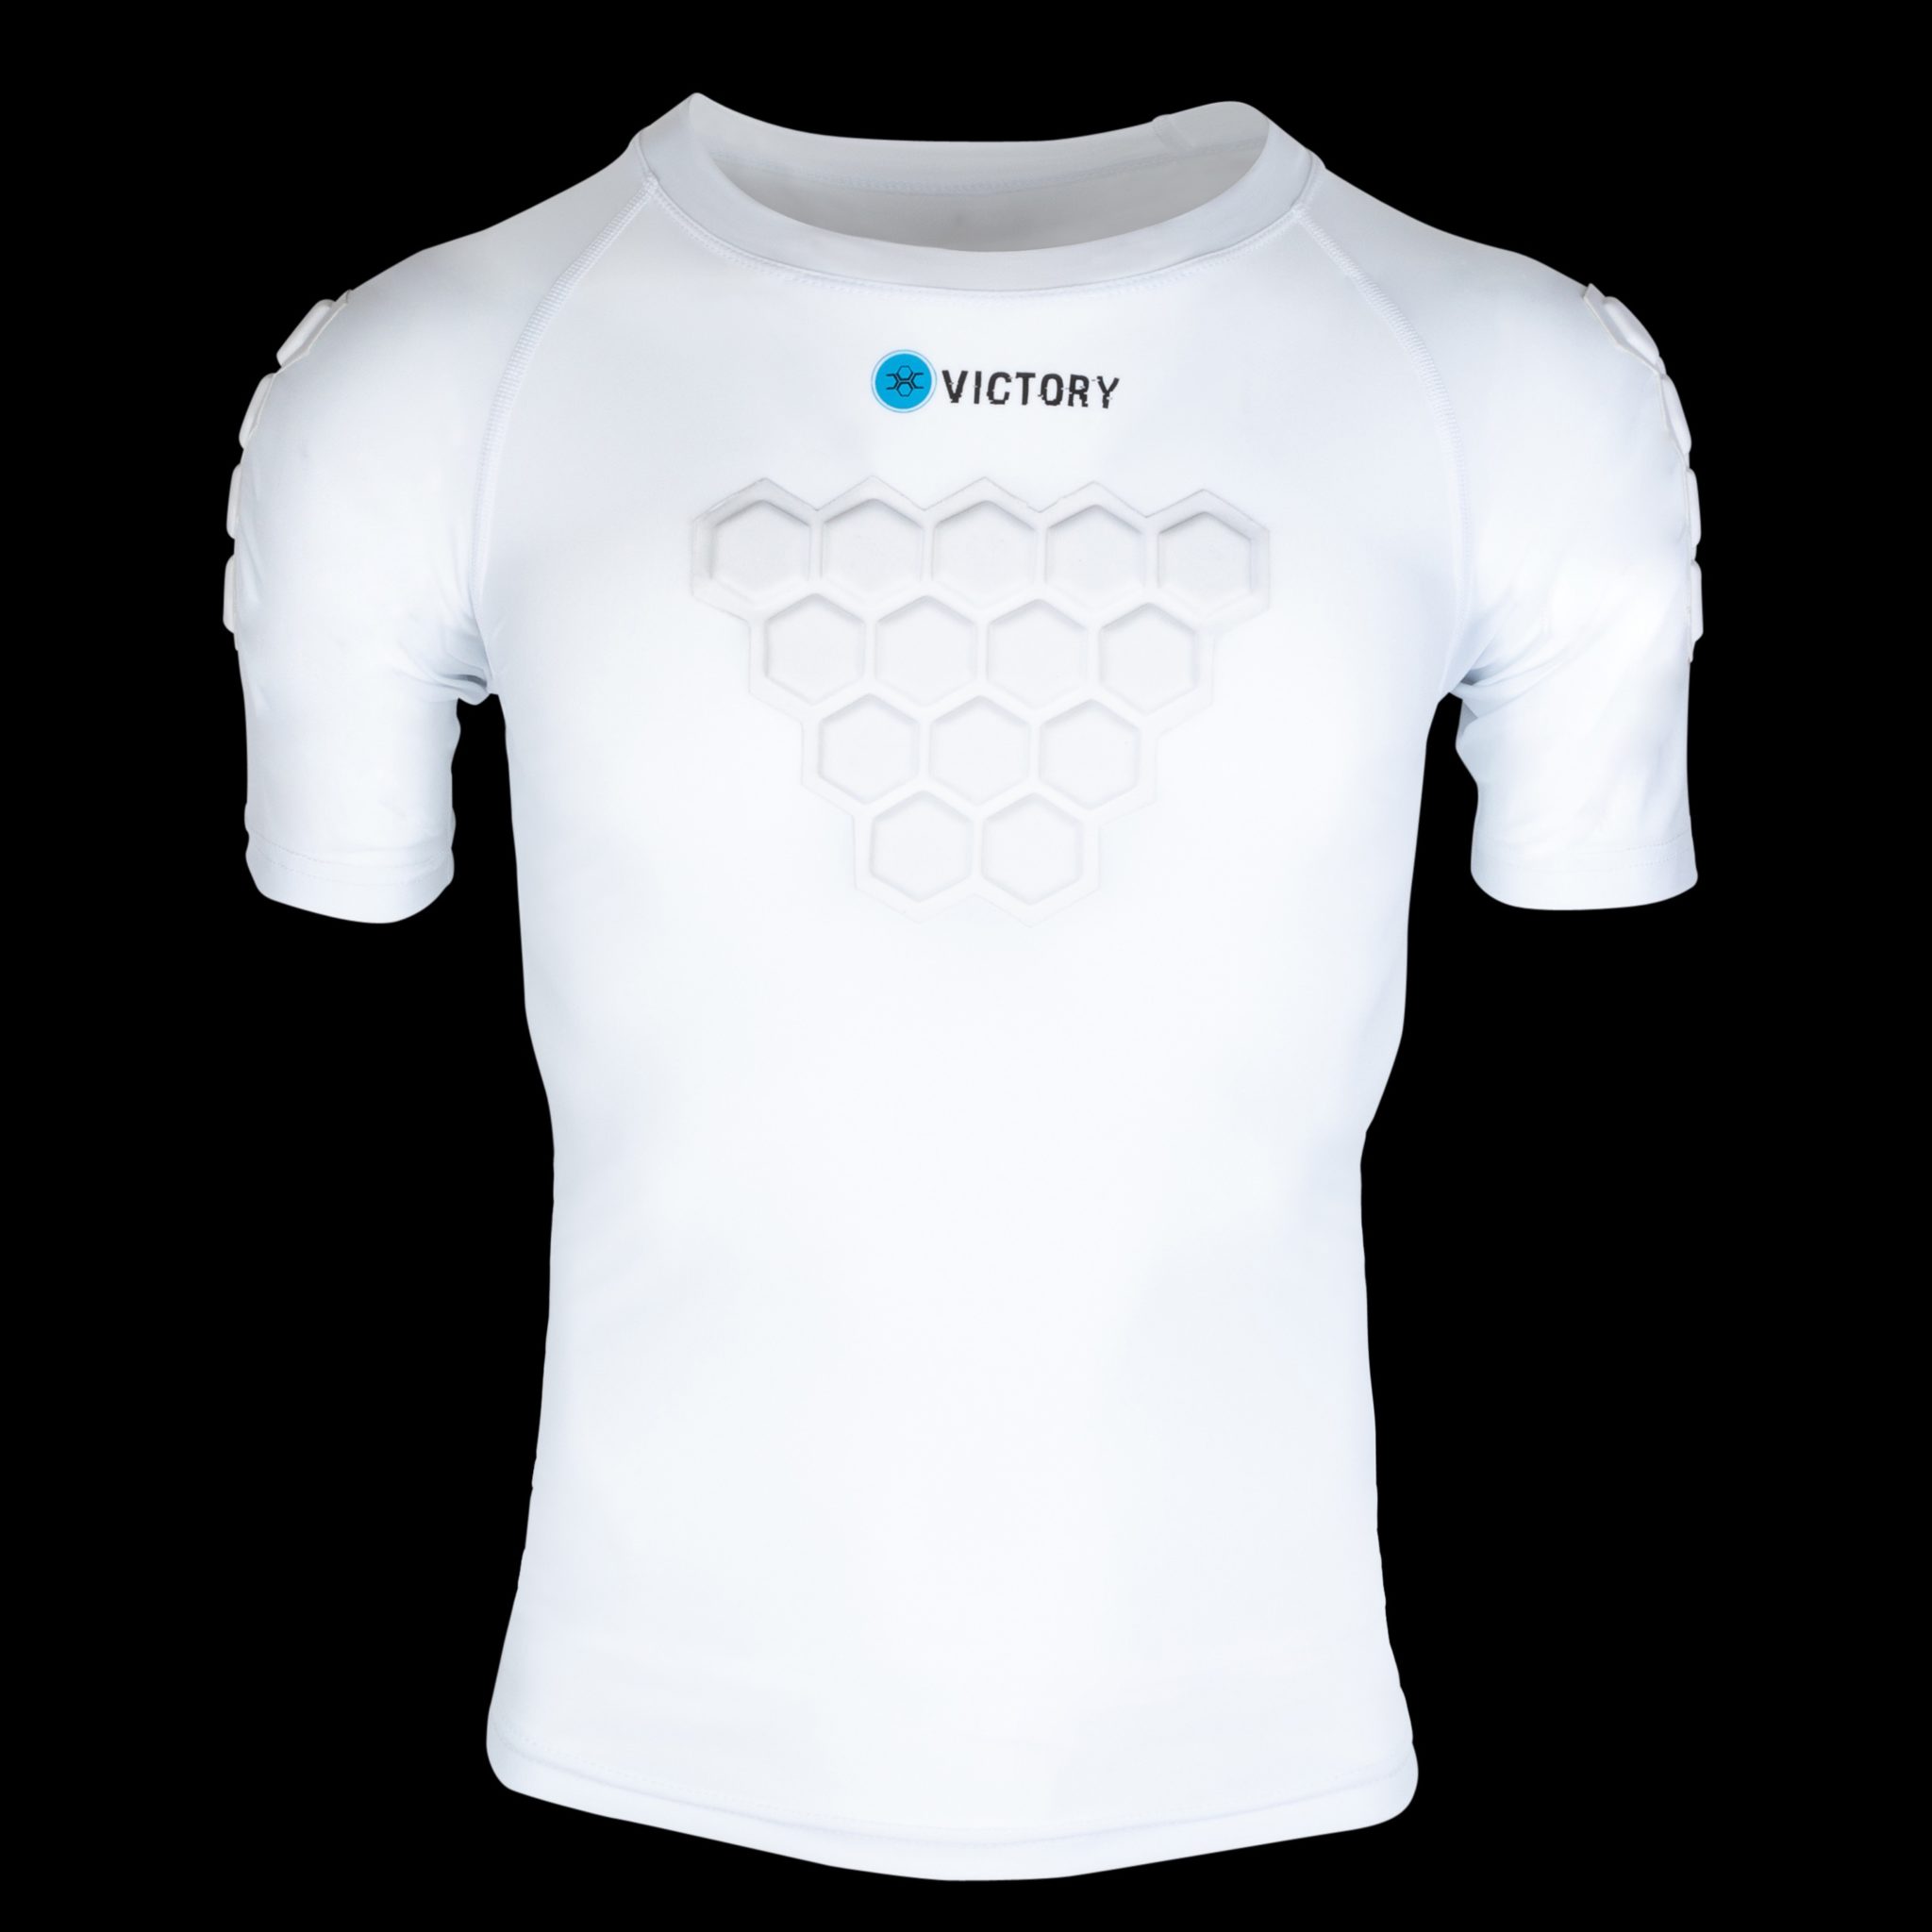 PLAYER protective shirt (padding on chest, arms, and back